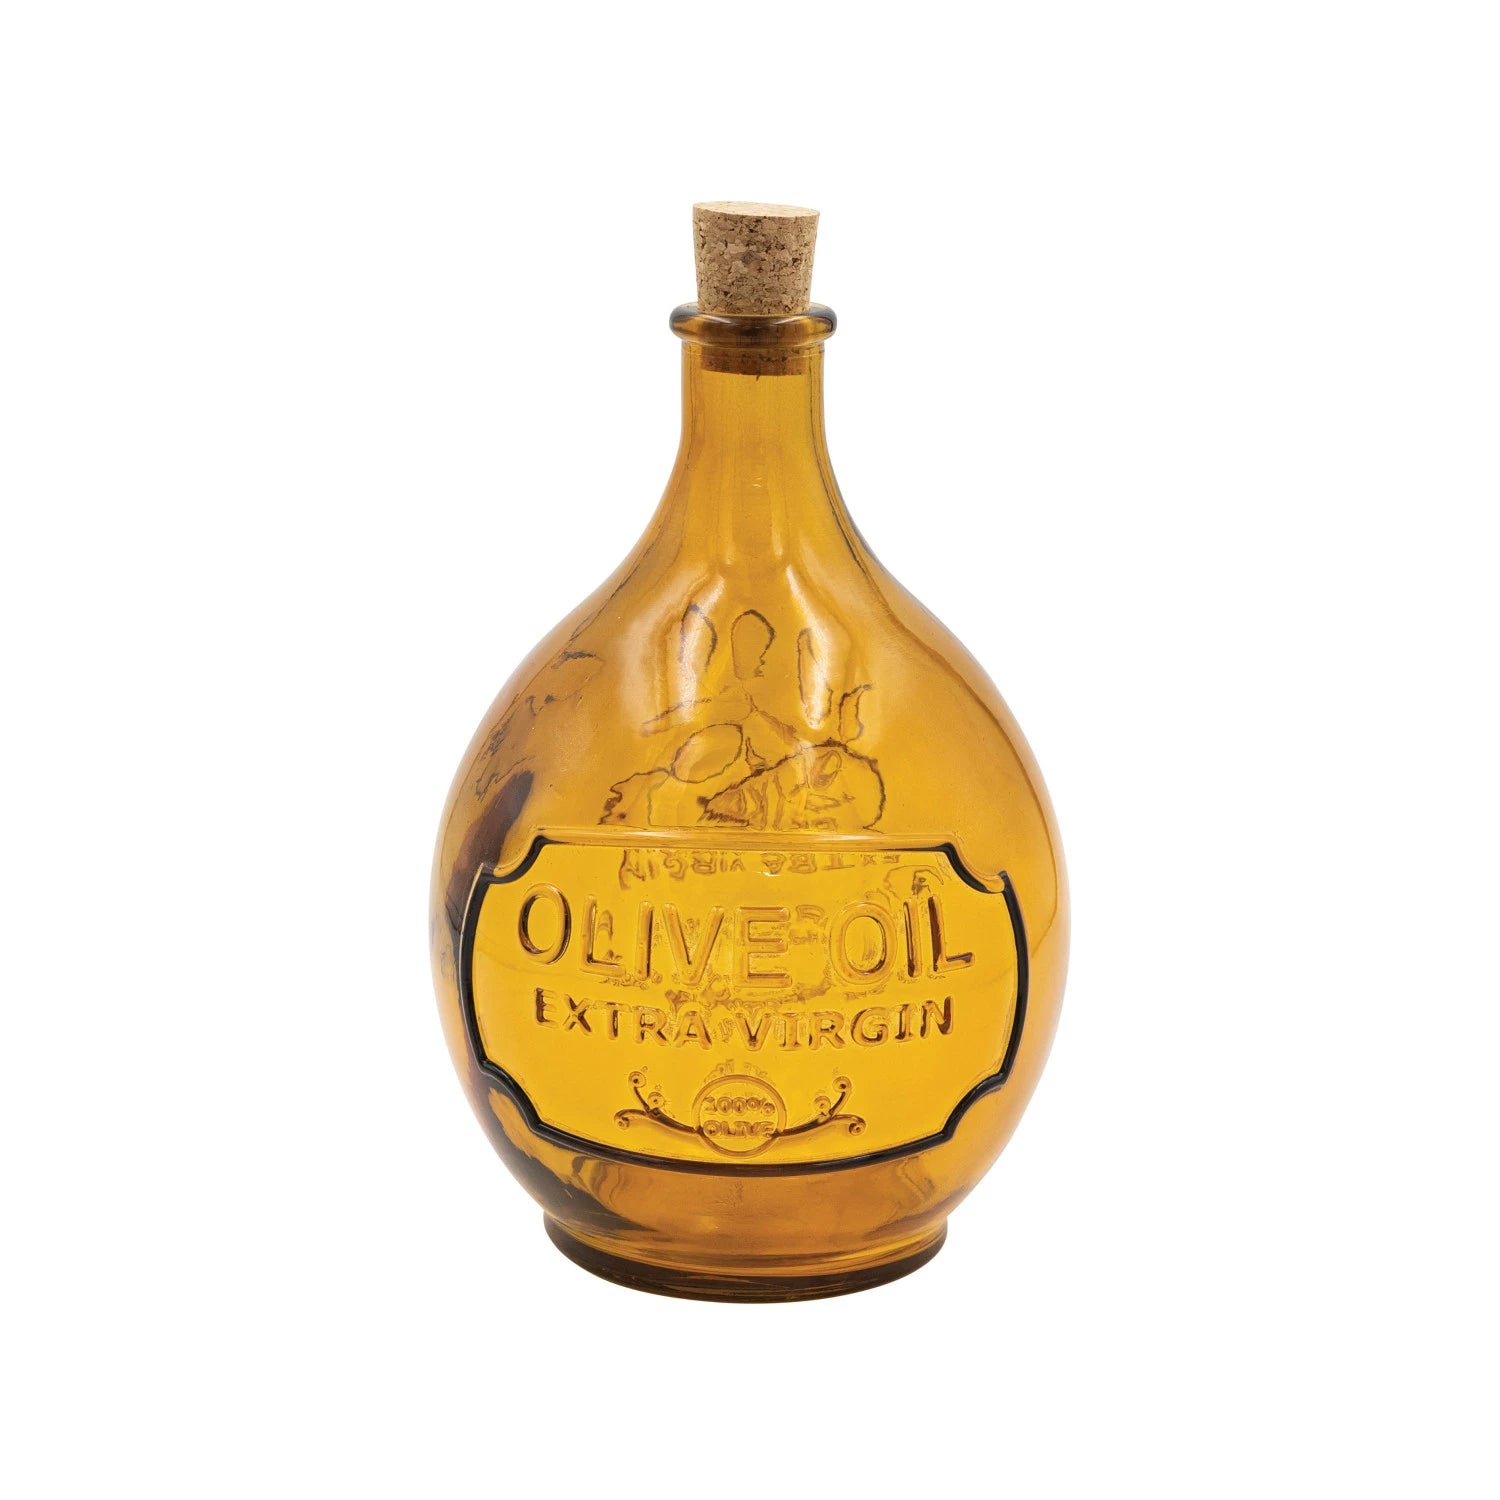 Embossed recycled glass olive oil bottle with cork stopper.